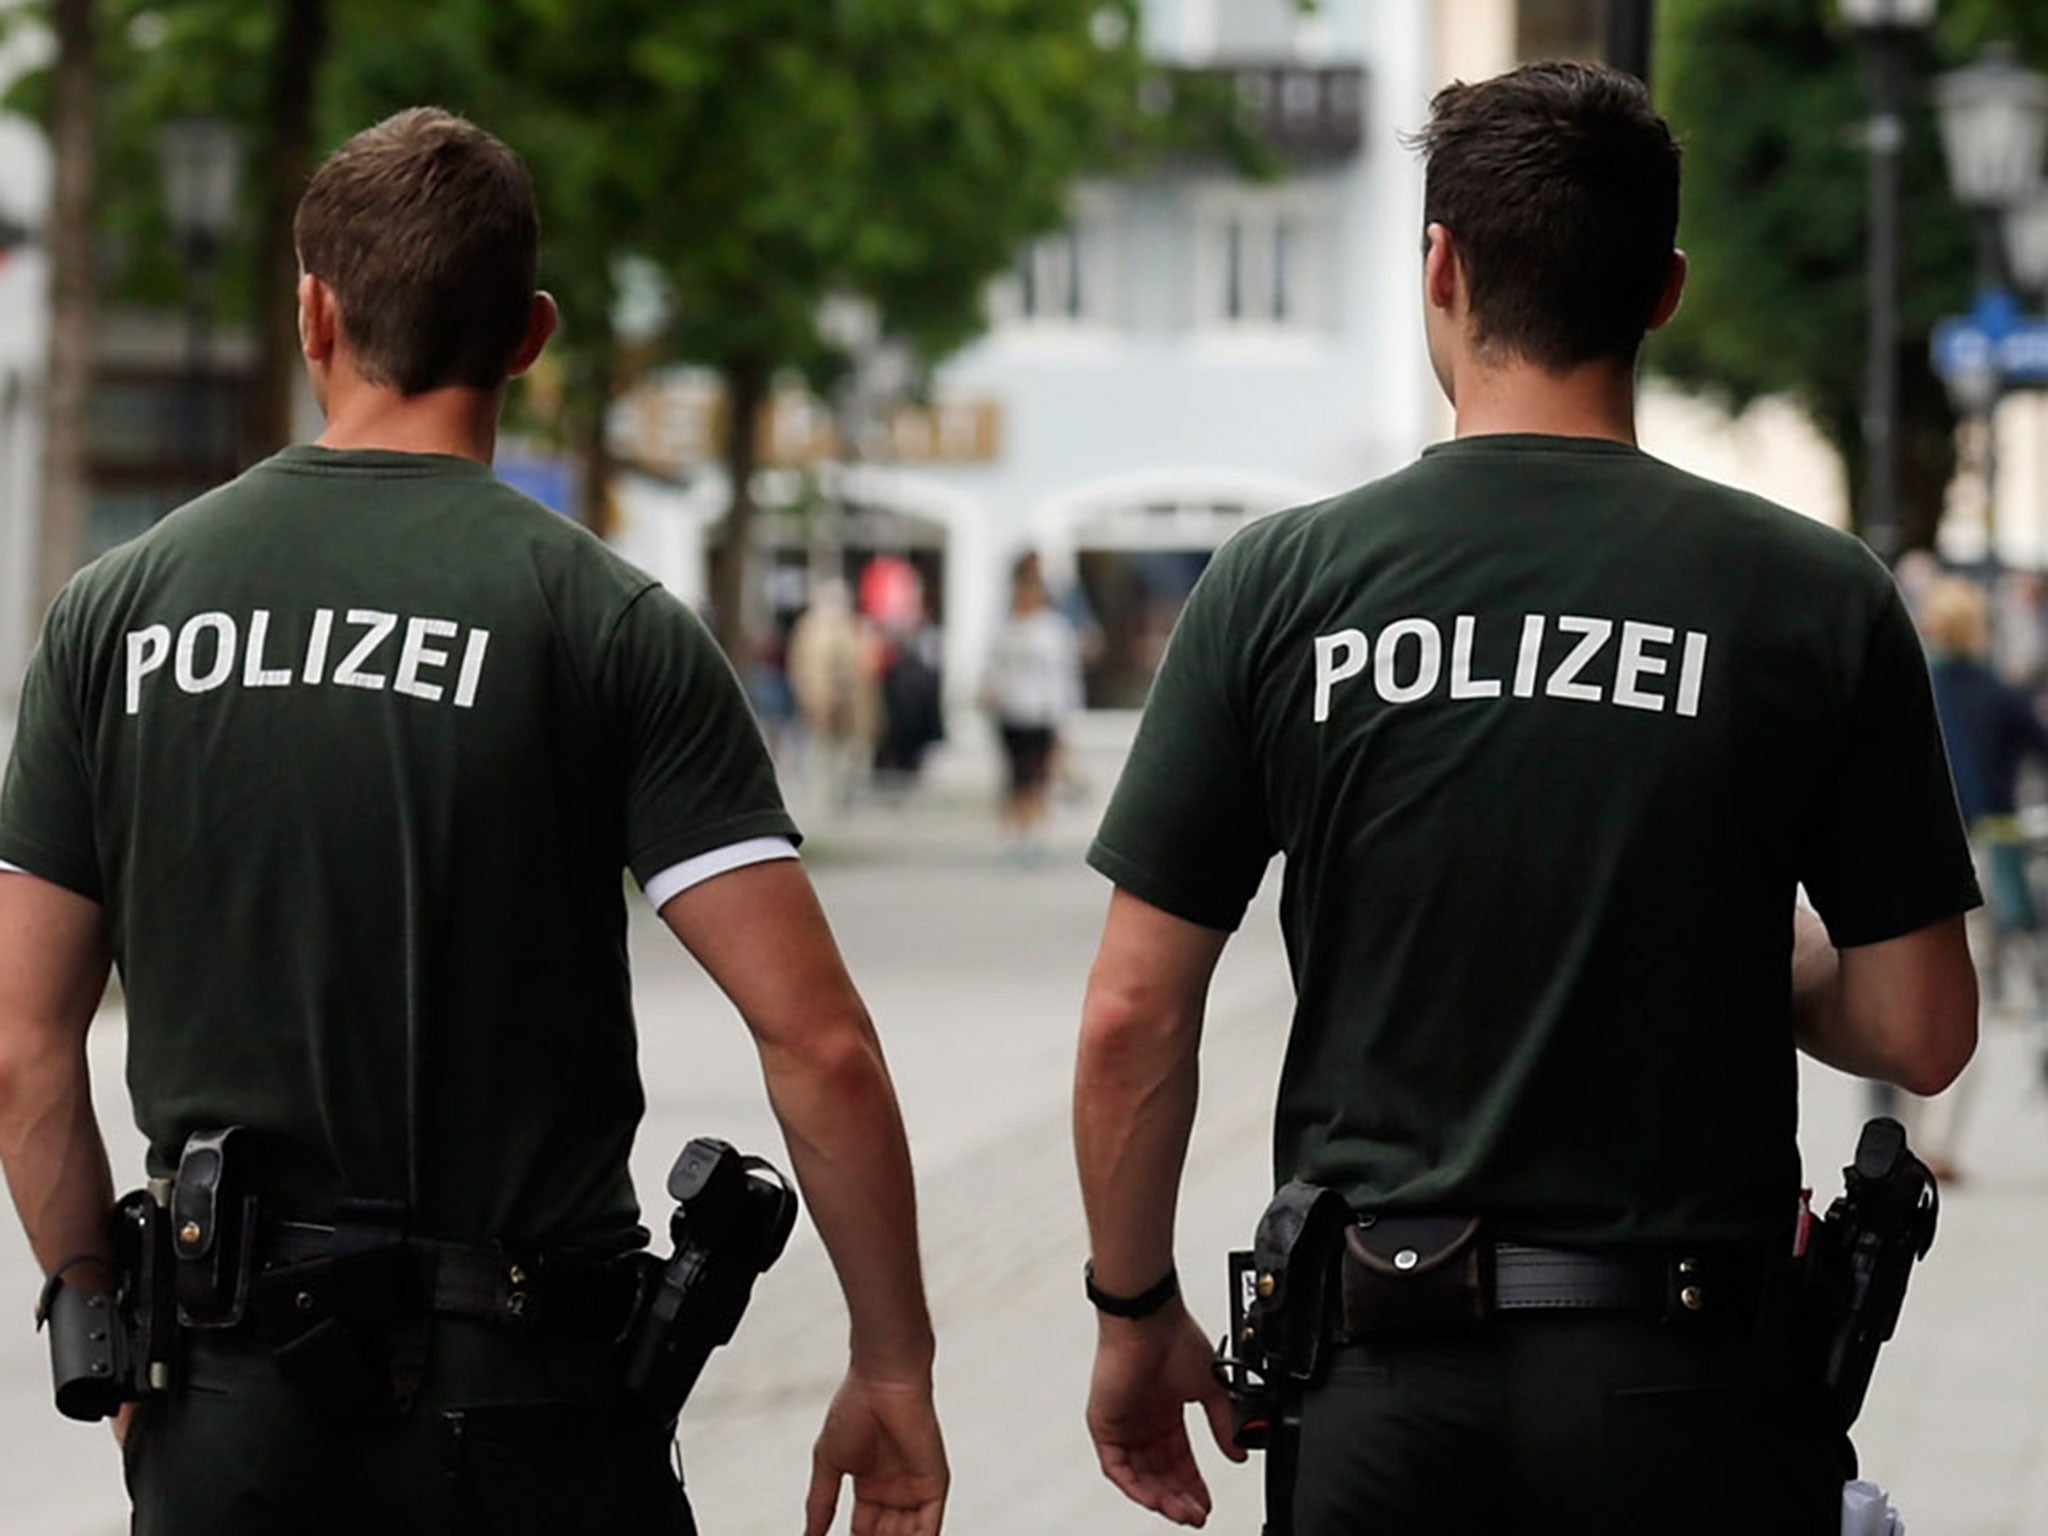 Police shut the Bavarian bus stop for nearly three hours after a little girl was run over